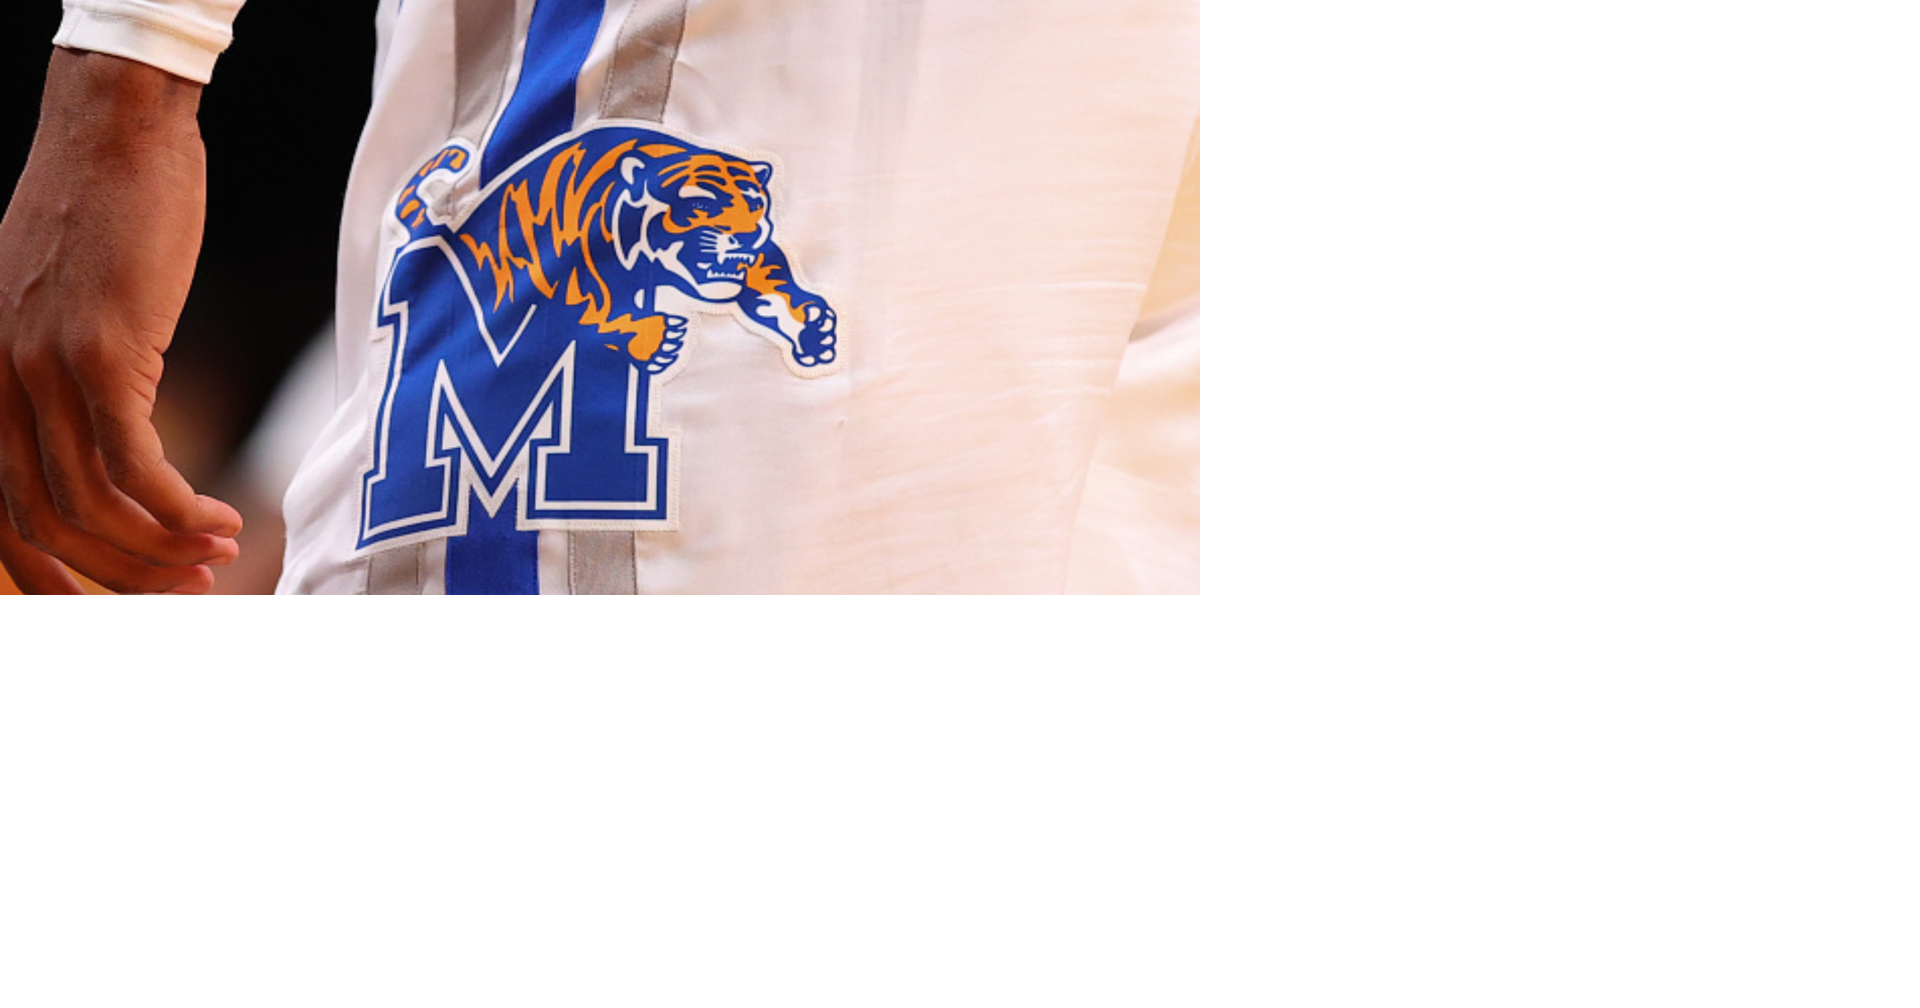 Memphis Tigers basketball team jumps 4 spots in latest poll